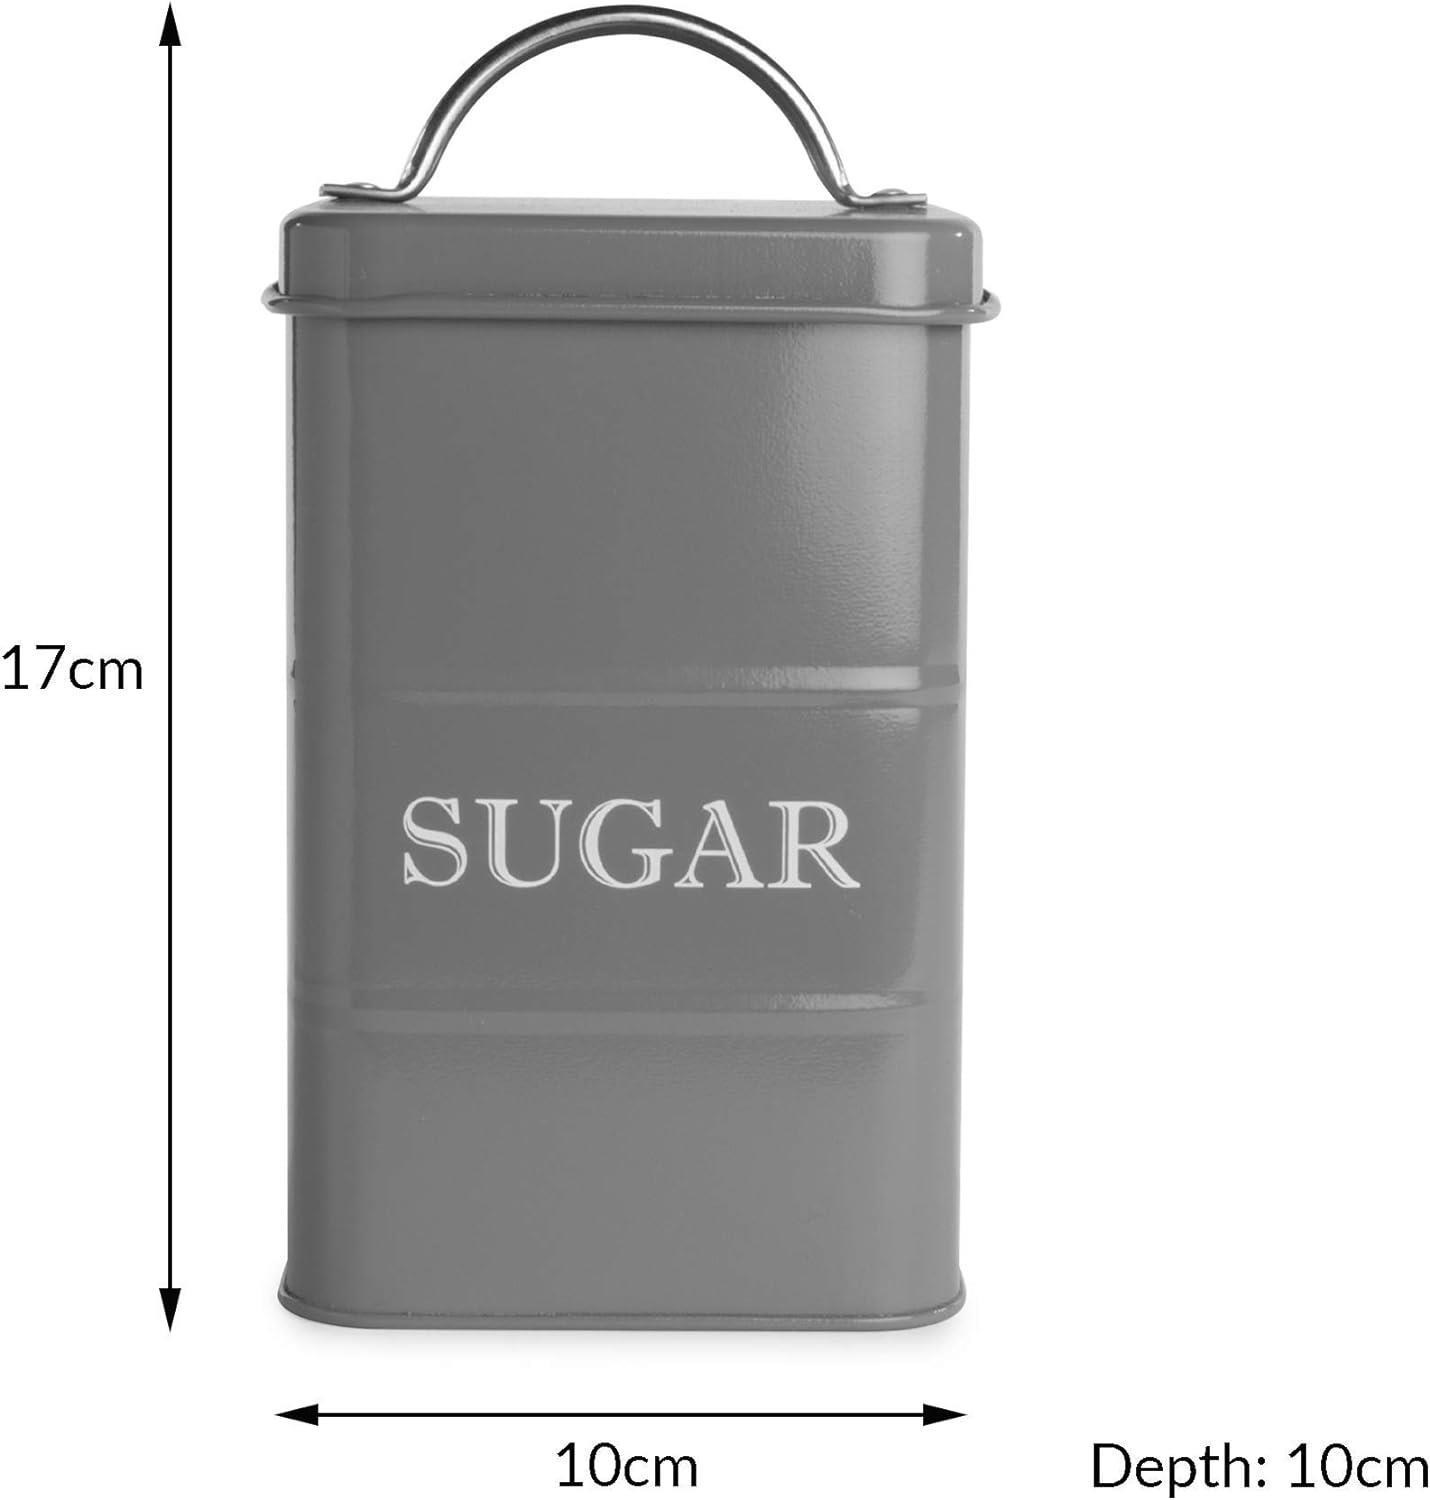 Stainless Steel Tea, Coffee & Sugar Canisters Grey | M&W